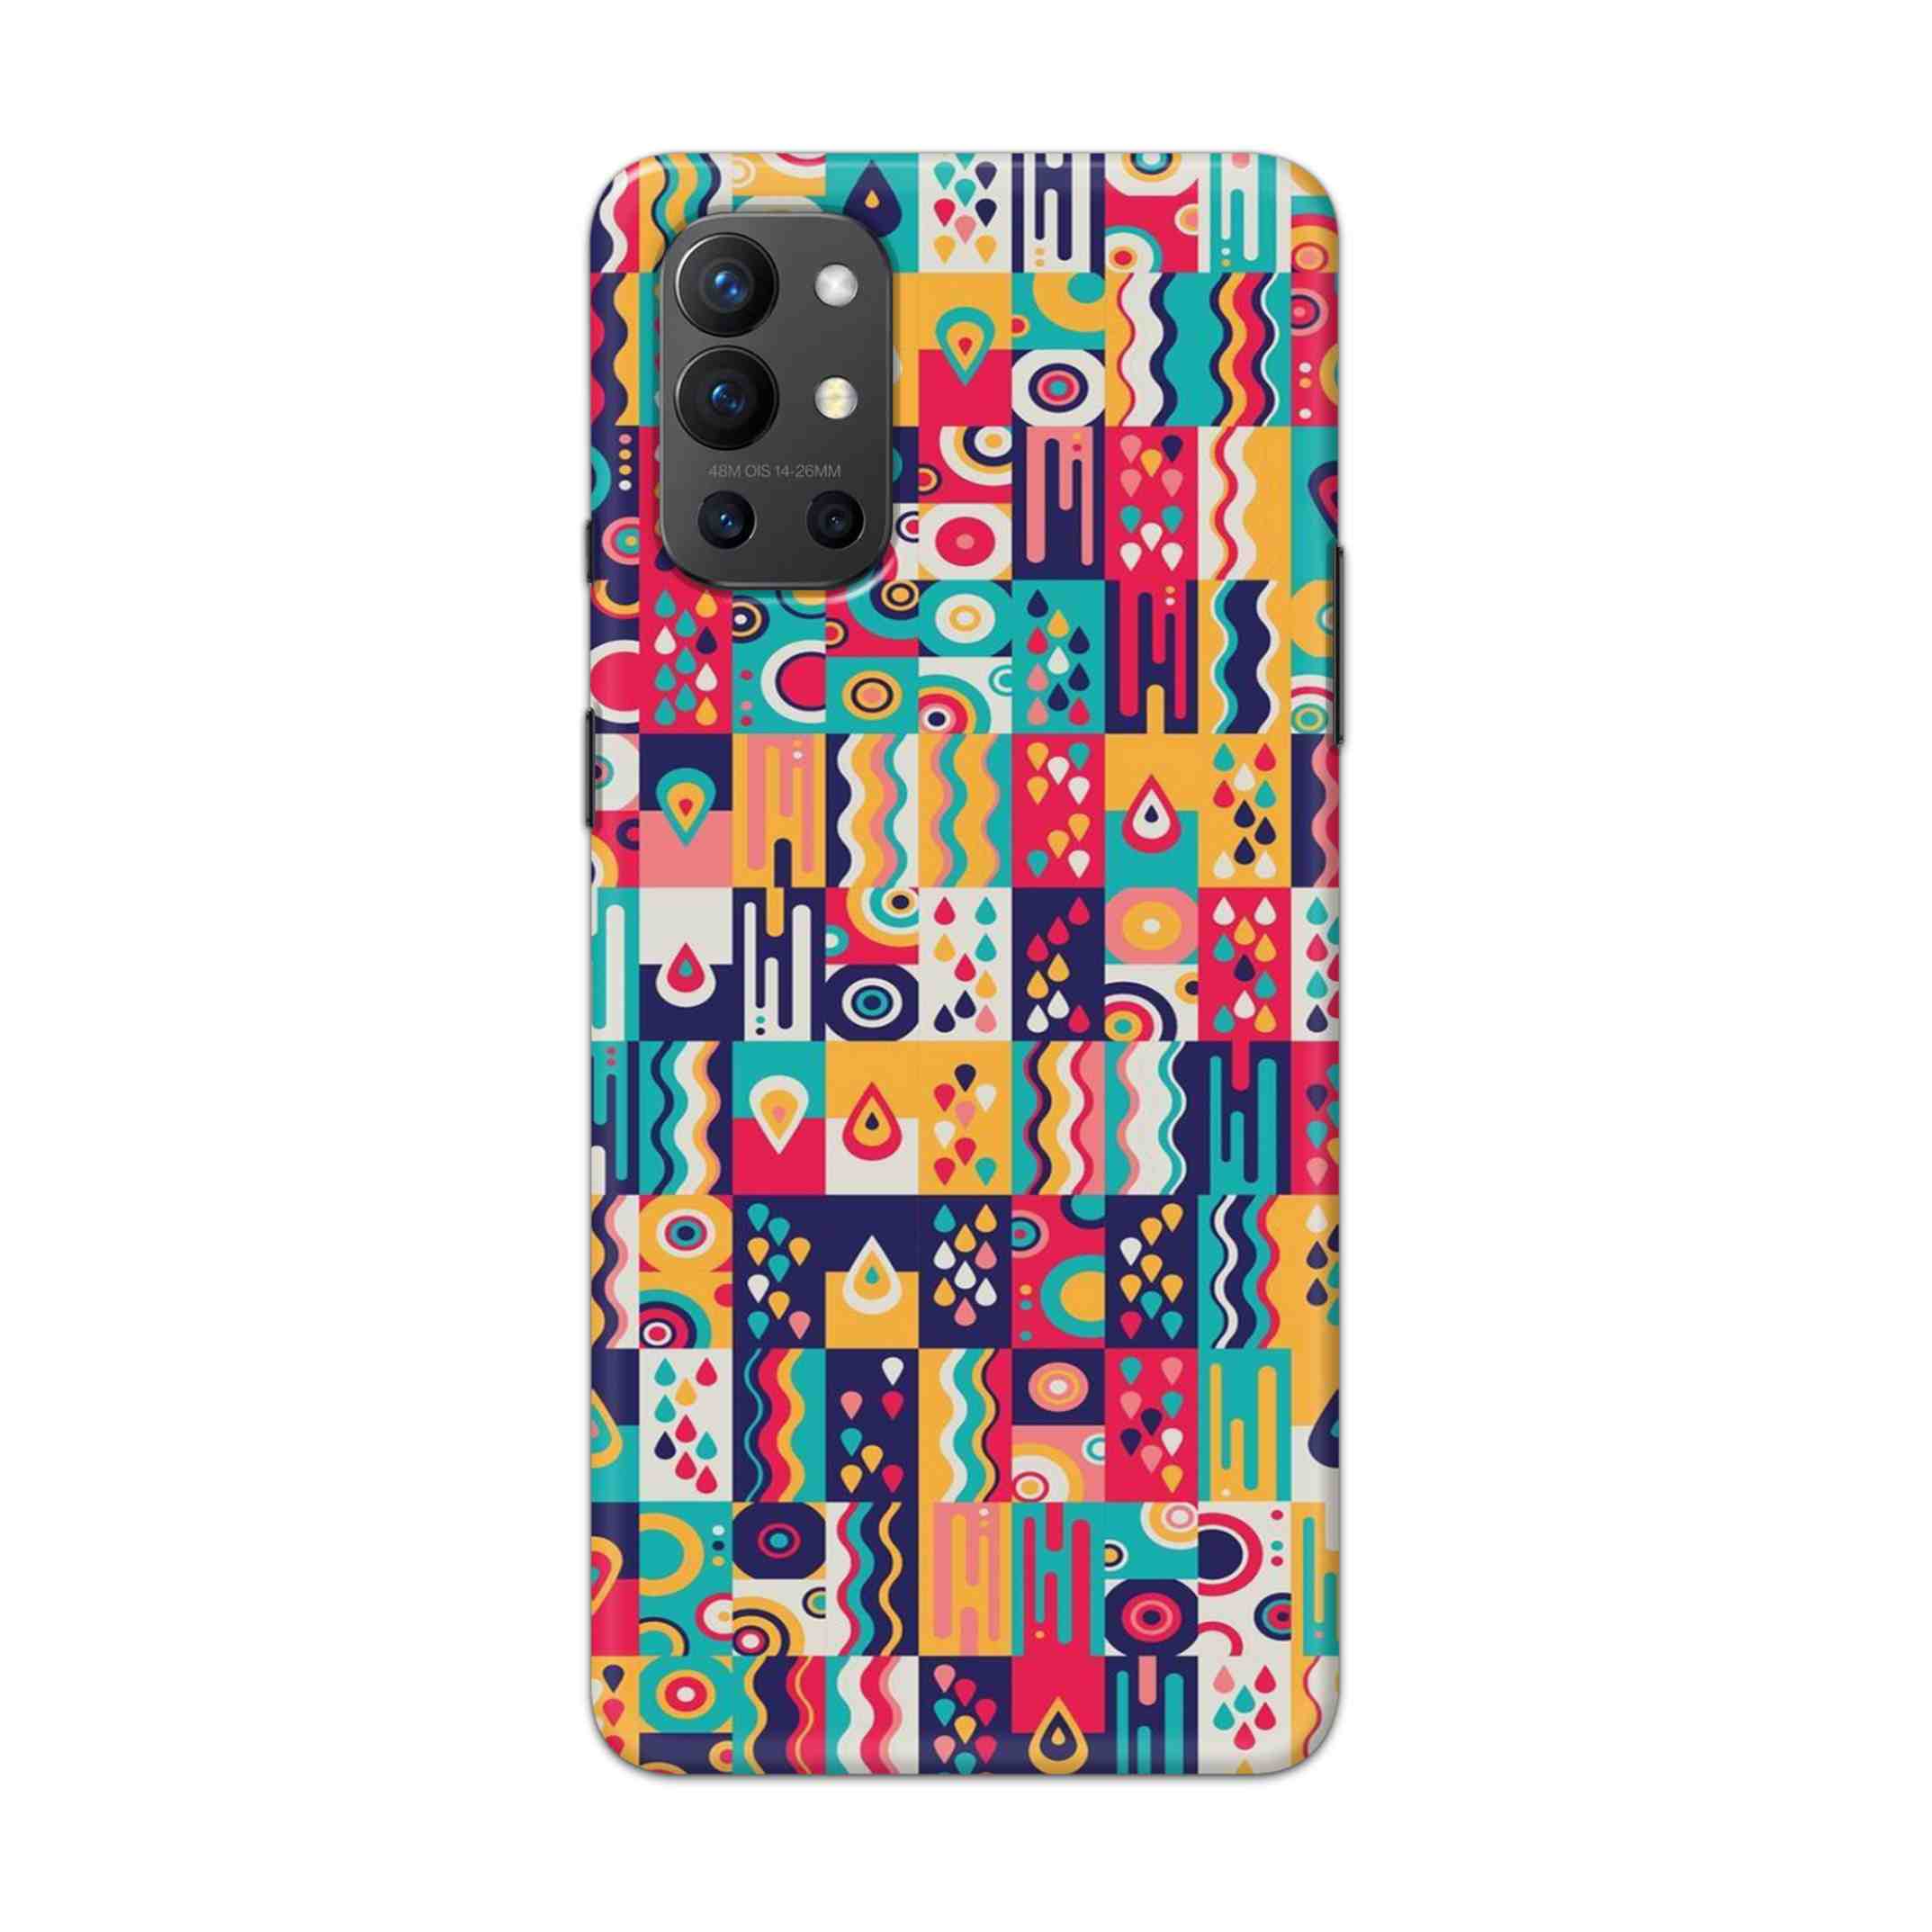 Buy Art Hard Back Mobile Phone Case Cover For OnePlus 9R / 8T Online